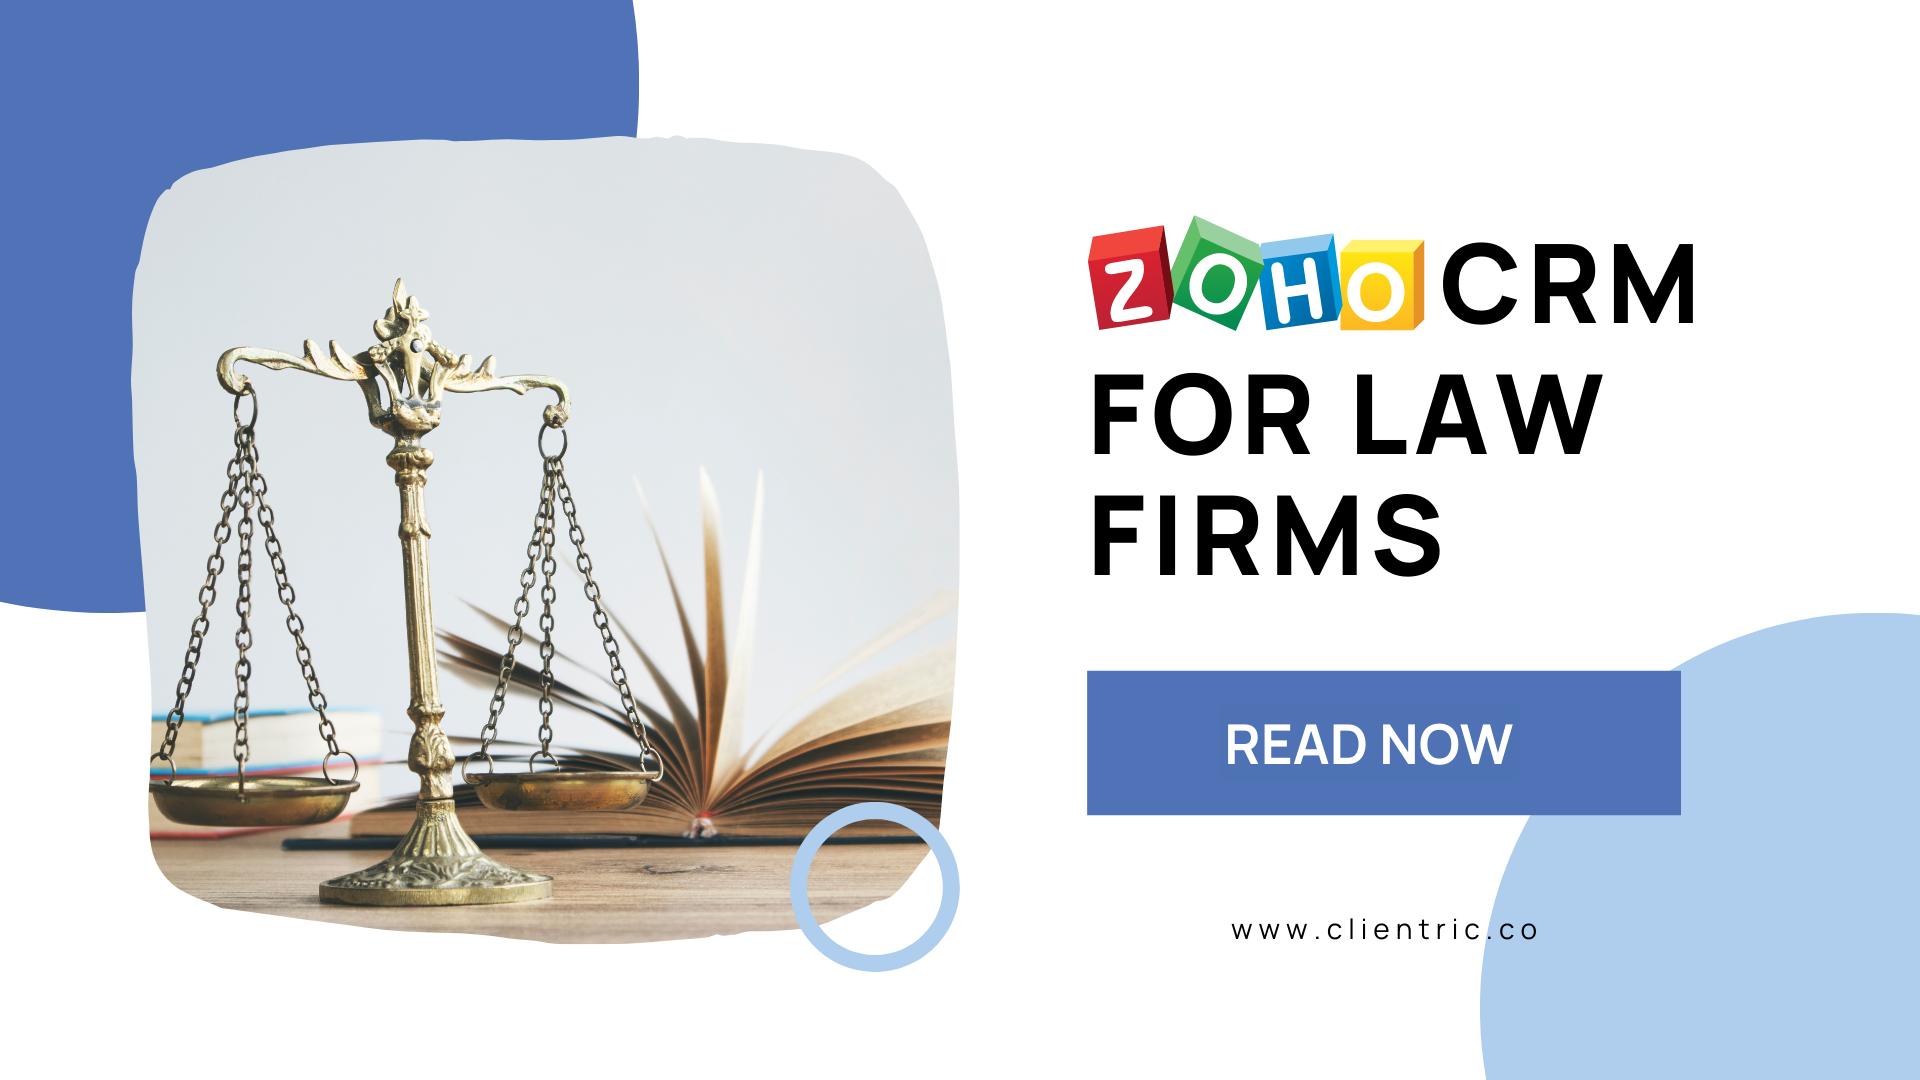 Benefits of Zoho CRM for Law Firms